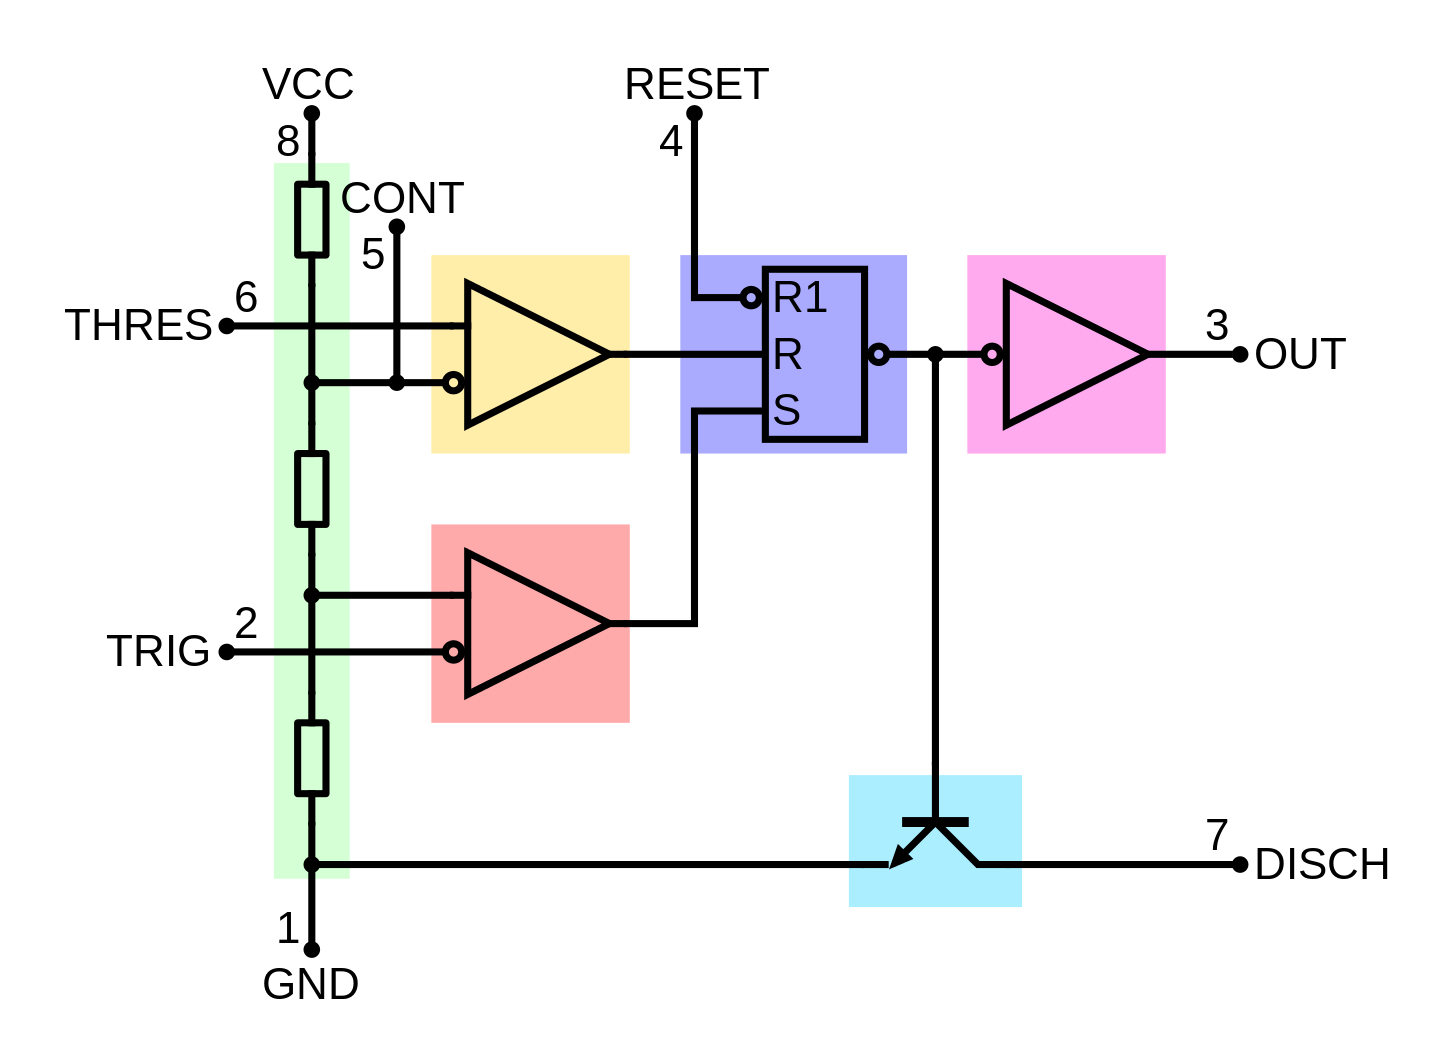 A schematic for a 555 timer integrated circuit